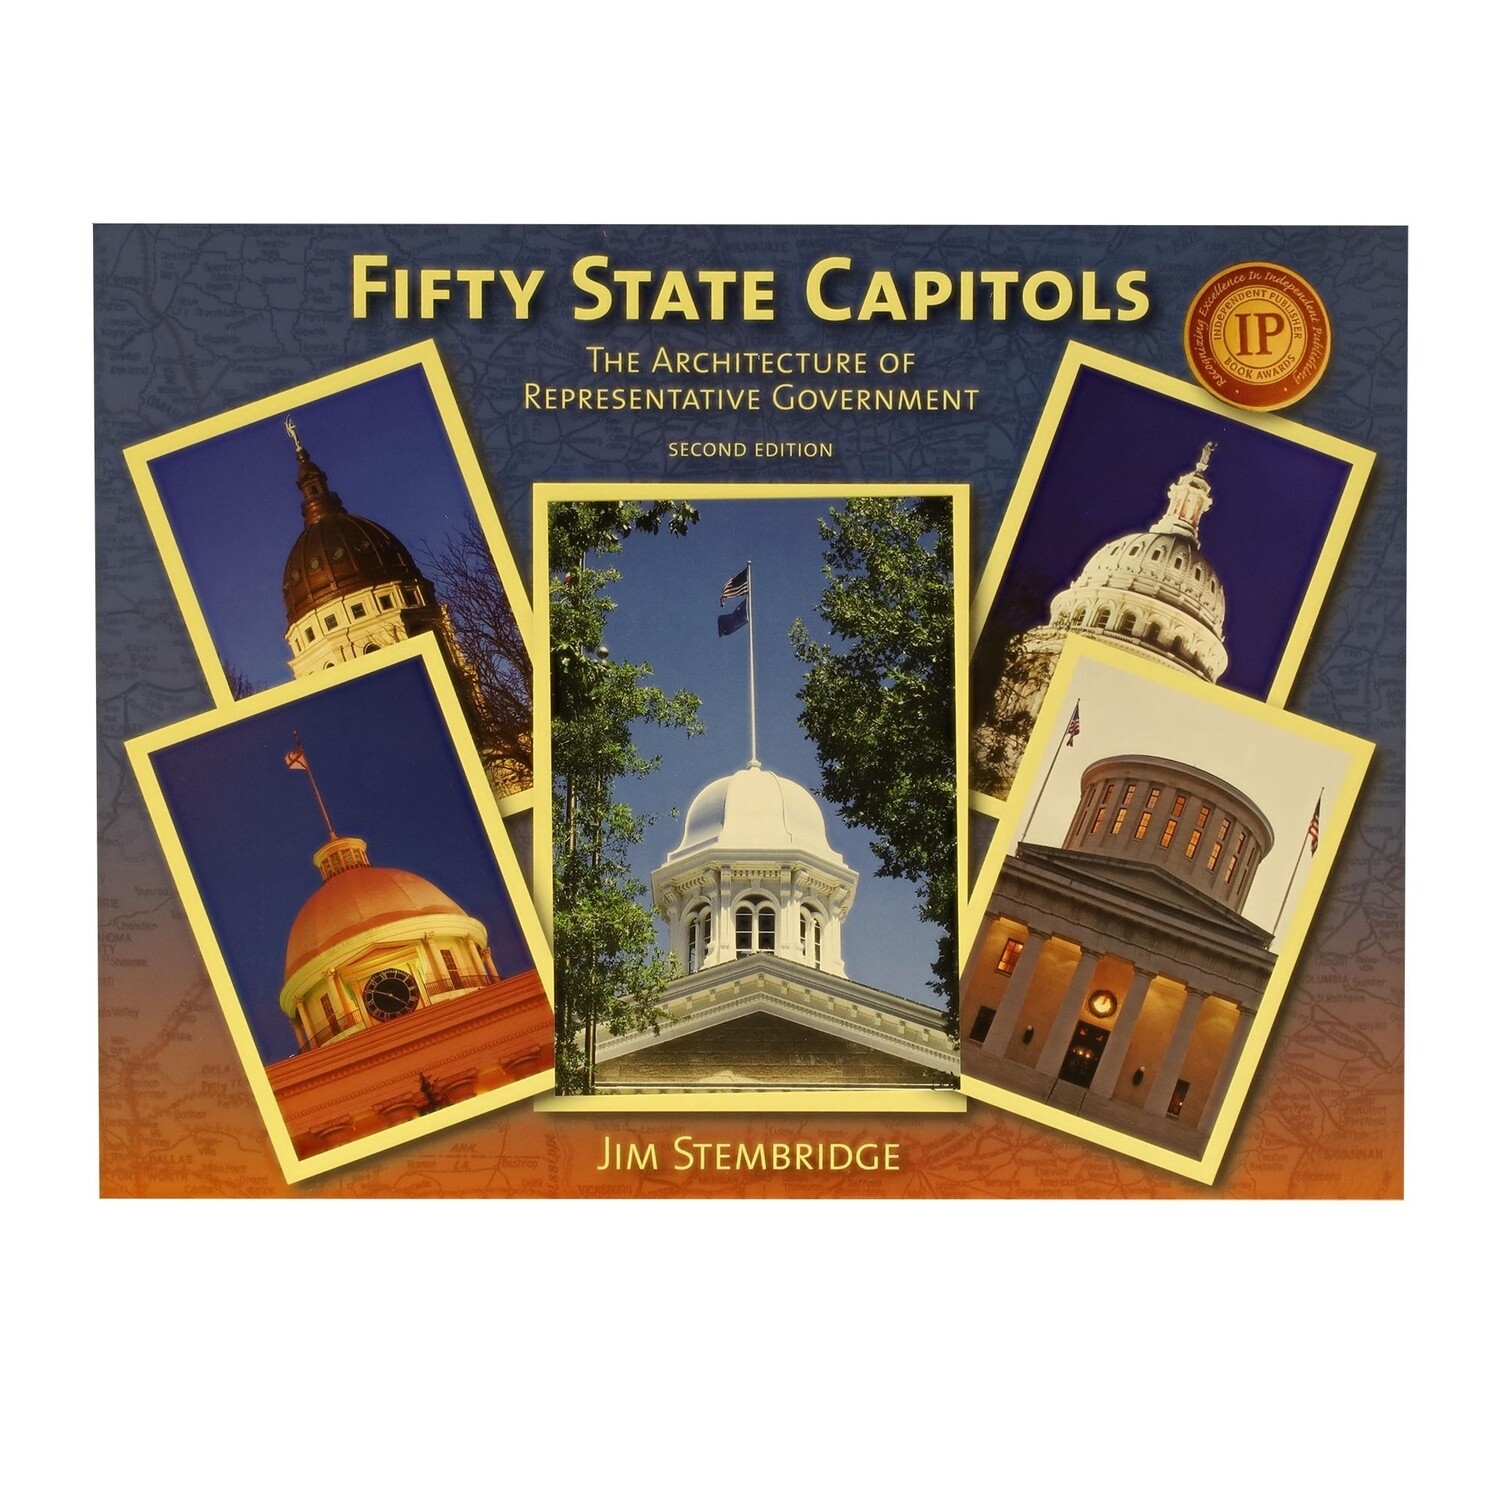 Fifty State Capitols, The Architecture of Representative Government - Second Edition by Jim Stembridge